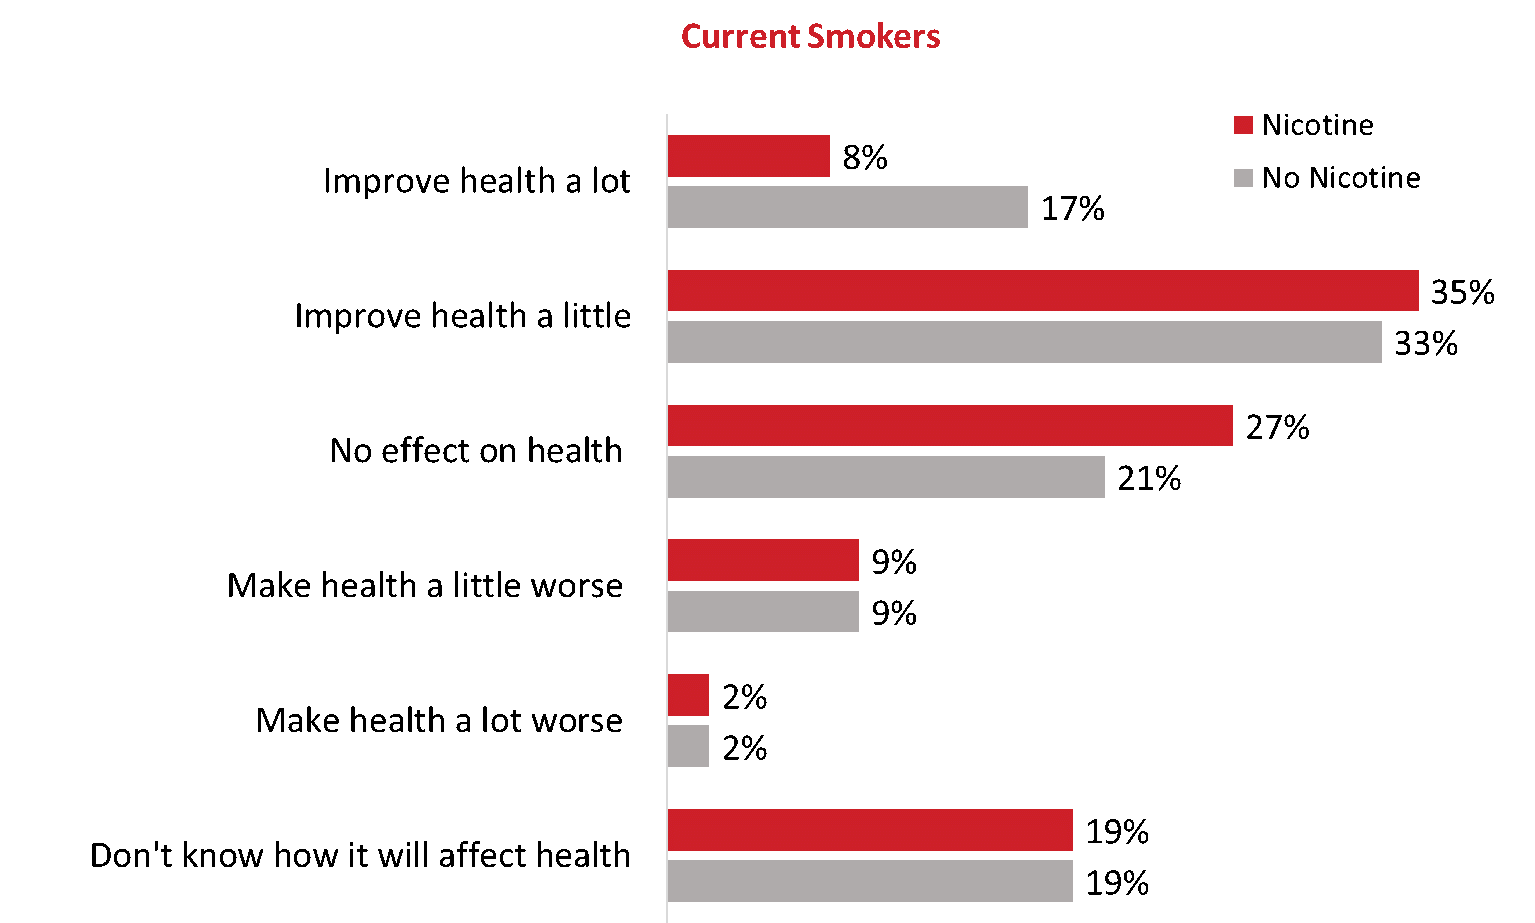 Figure 41: Switching to e-cigarettes and health [current smokers]